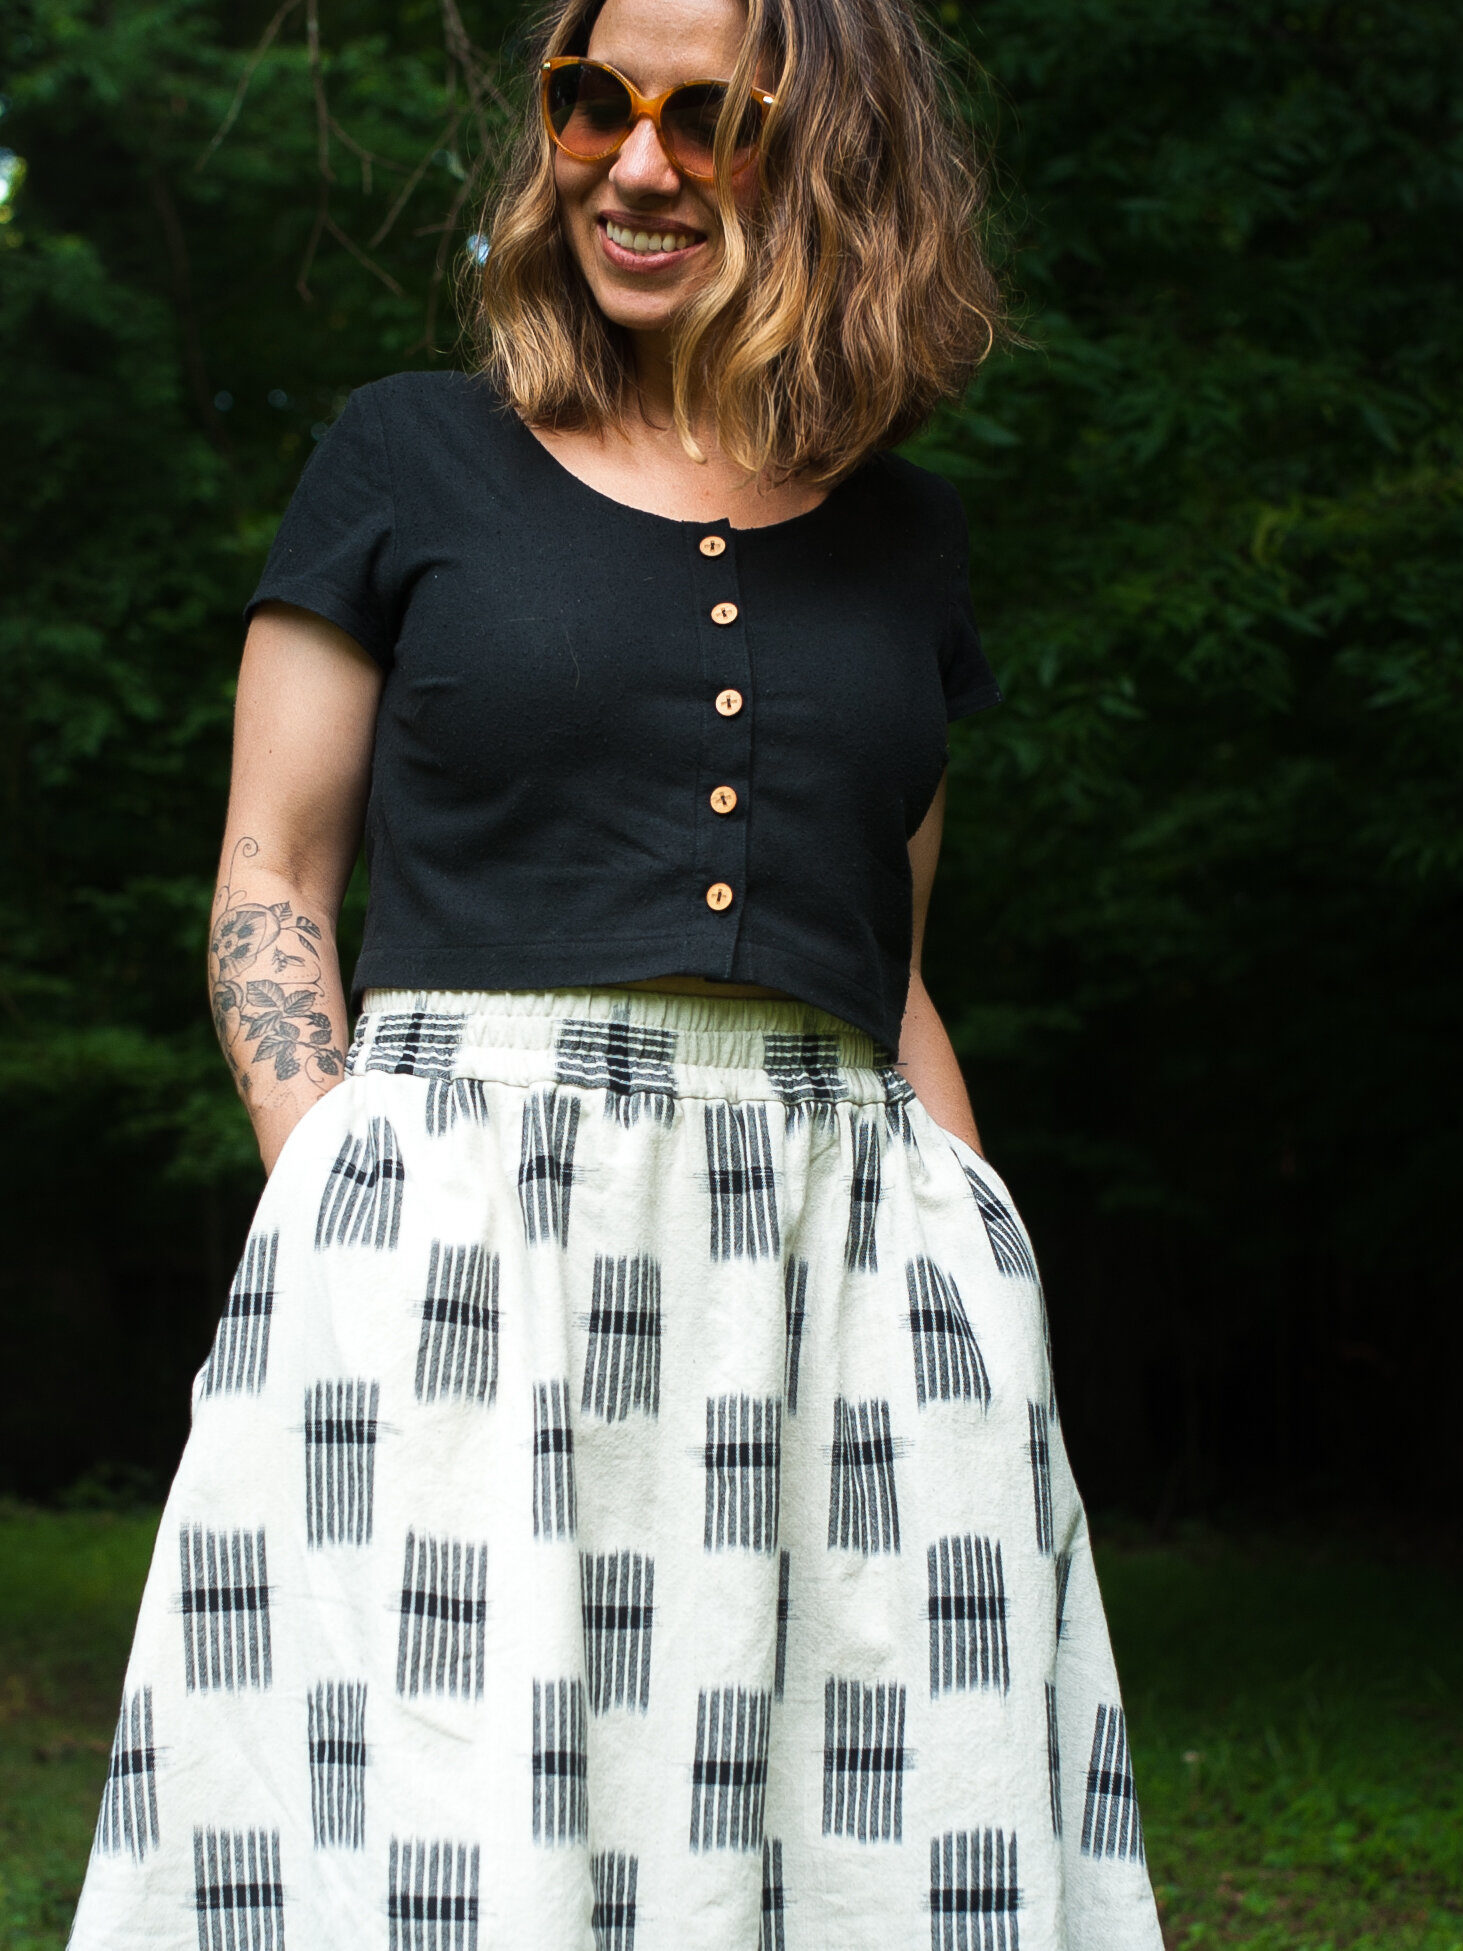 Meg wears a cropped black hinterland top and a black and white printed gypsum skirt in the woods